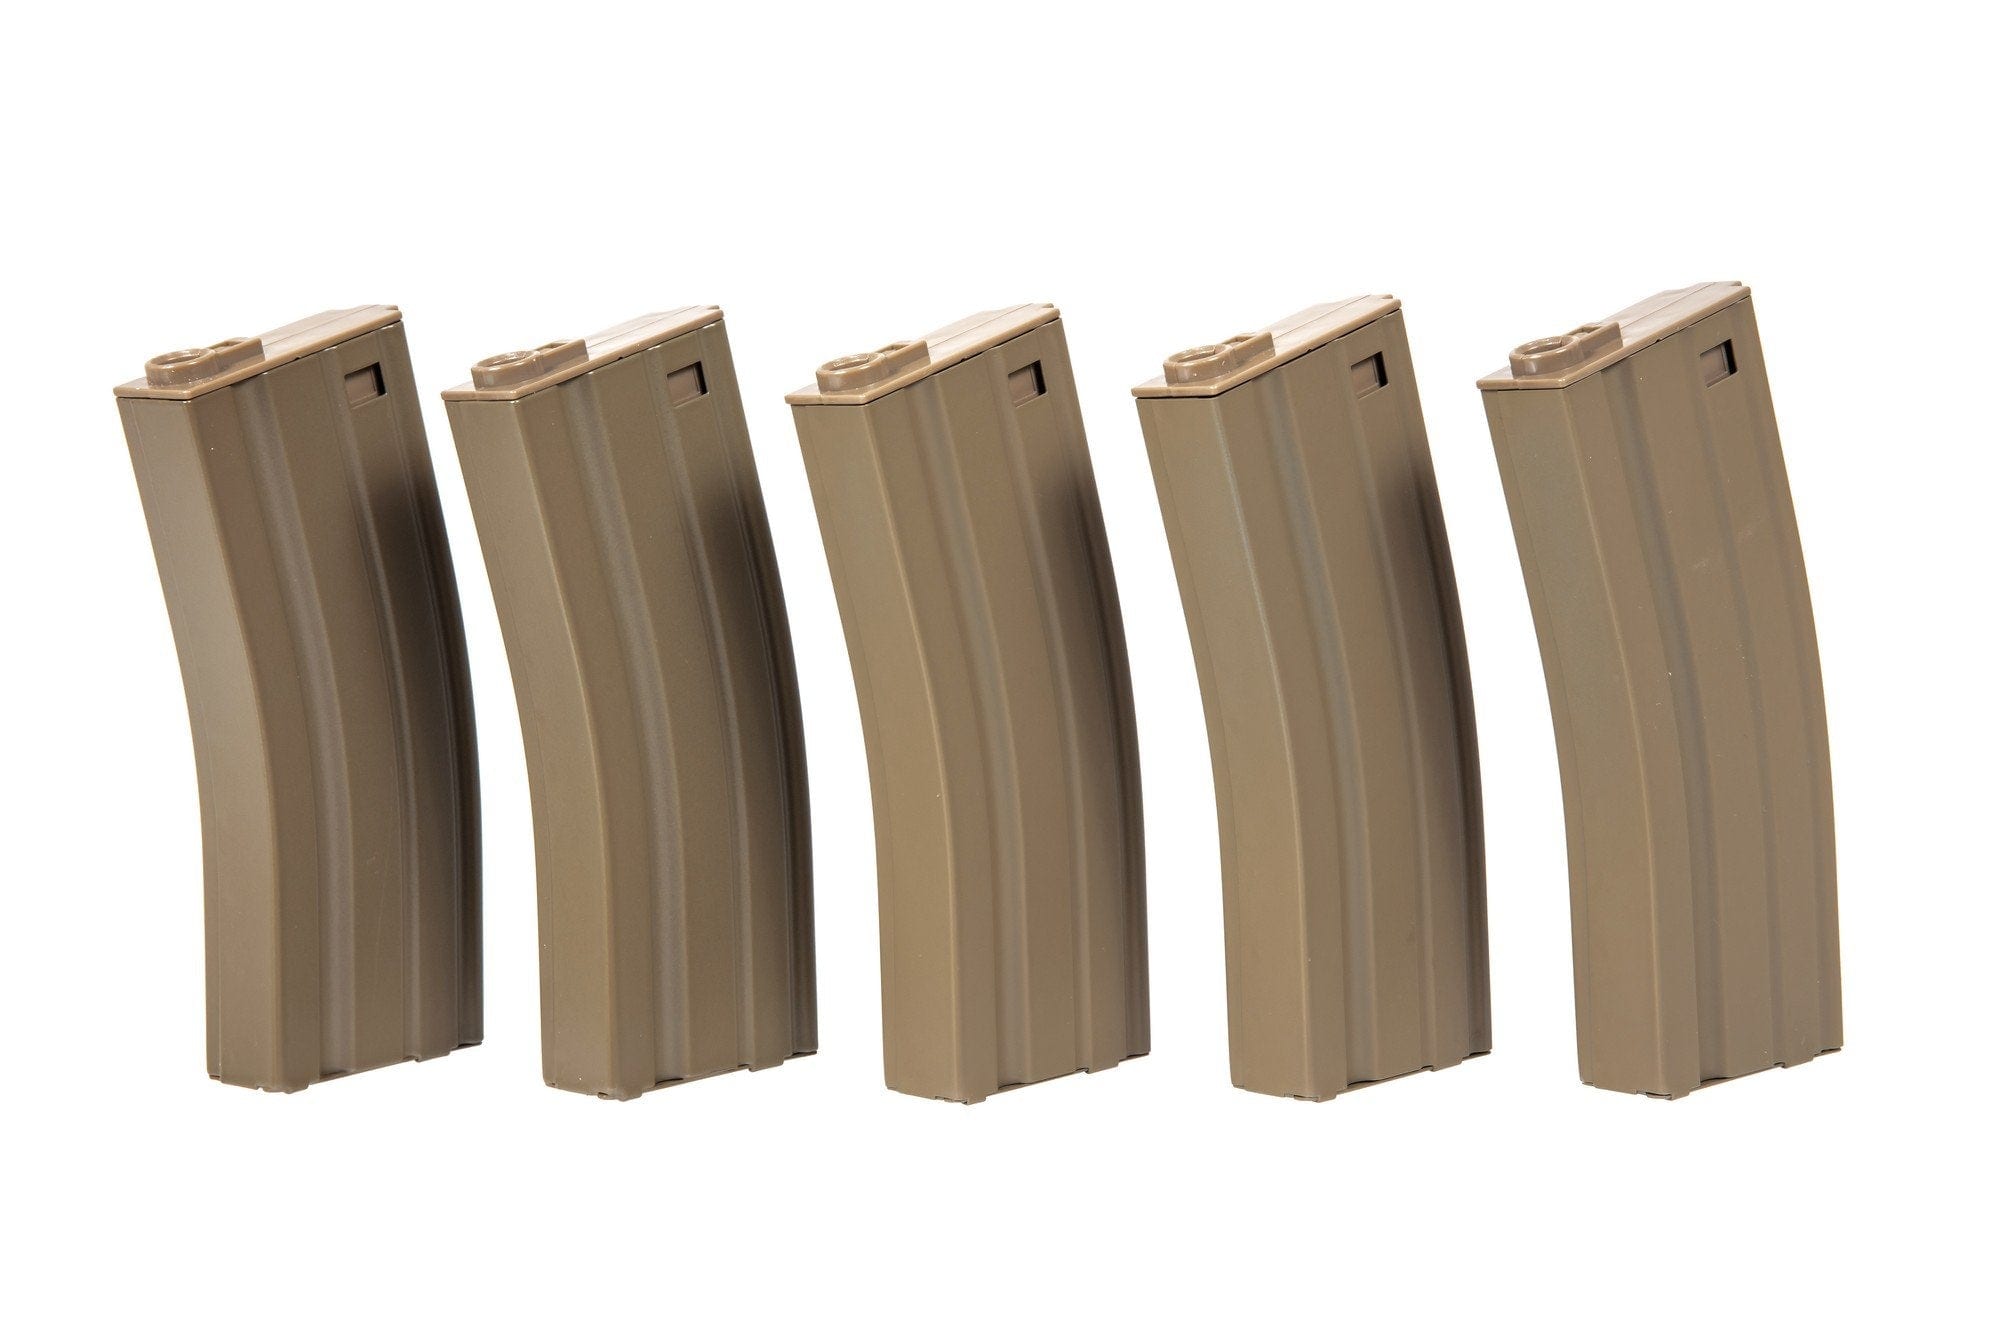 5pcs set - 70rd low-cap magazine for M4 / M16 - tan by Specna Arms on Airsoft Mania Europe